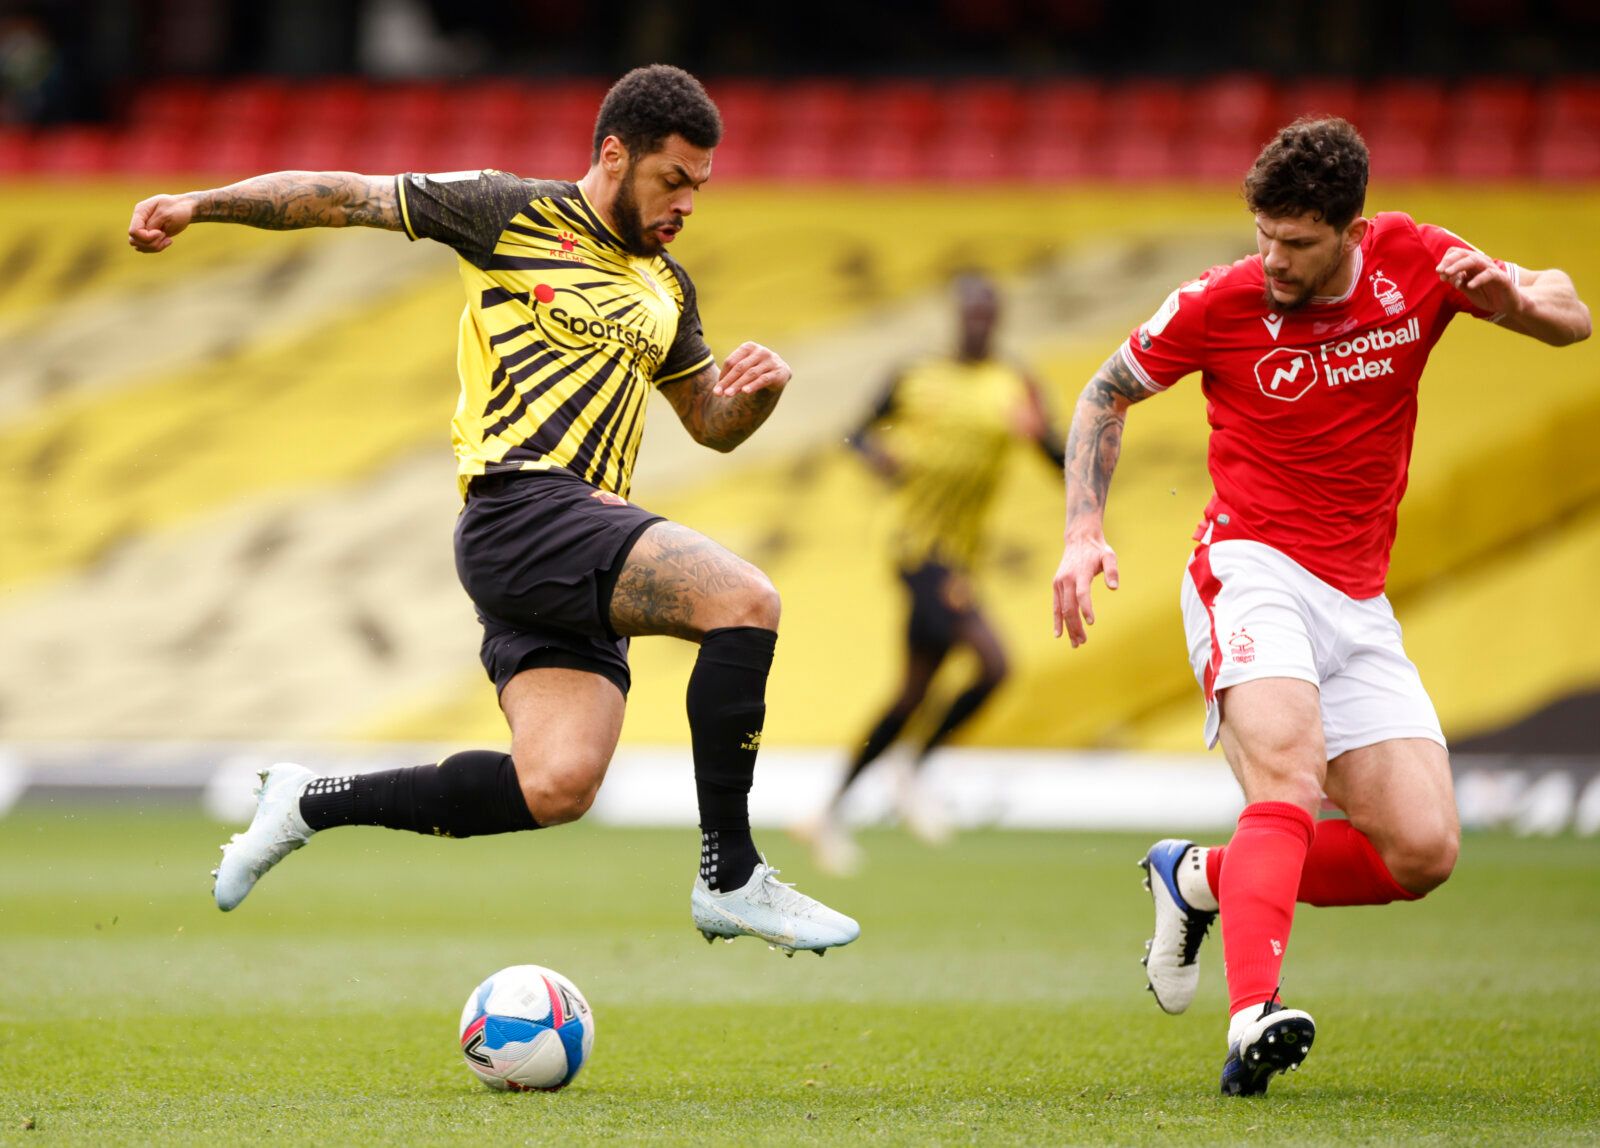 Soccer Football - Championship - Watford v Nottingham Forest - Vicarage Road, Watford, Britain - March 6, 2021 Watford's Andre Gray in action with Nottingham Forest’s Tobias Figueiredo Action Images/John Sibley EDITORIAL USE ONLY. No use with unauthorized audio, video, data, fixture lists, club/league logos or 'live' services. Online in-match use limited to 75 images, no video emulation. No use in betting, games or single club /league/player publications.  Please contact your account representat